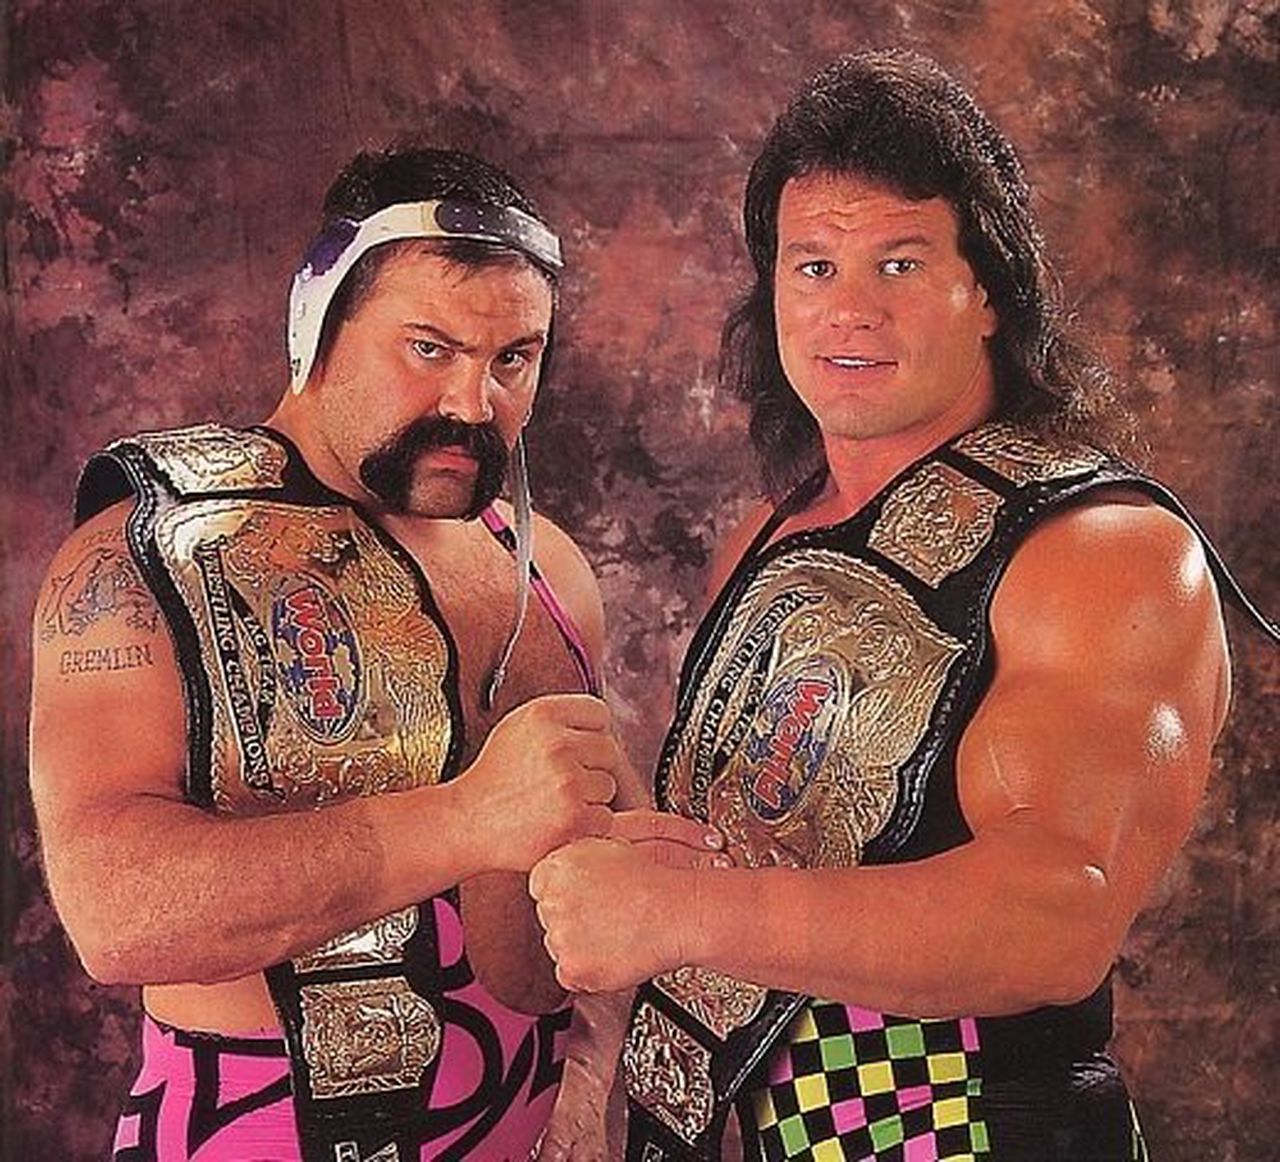 The Steiner Brothers To Be Inducted Into Wwe Hall Of Fame